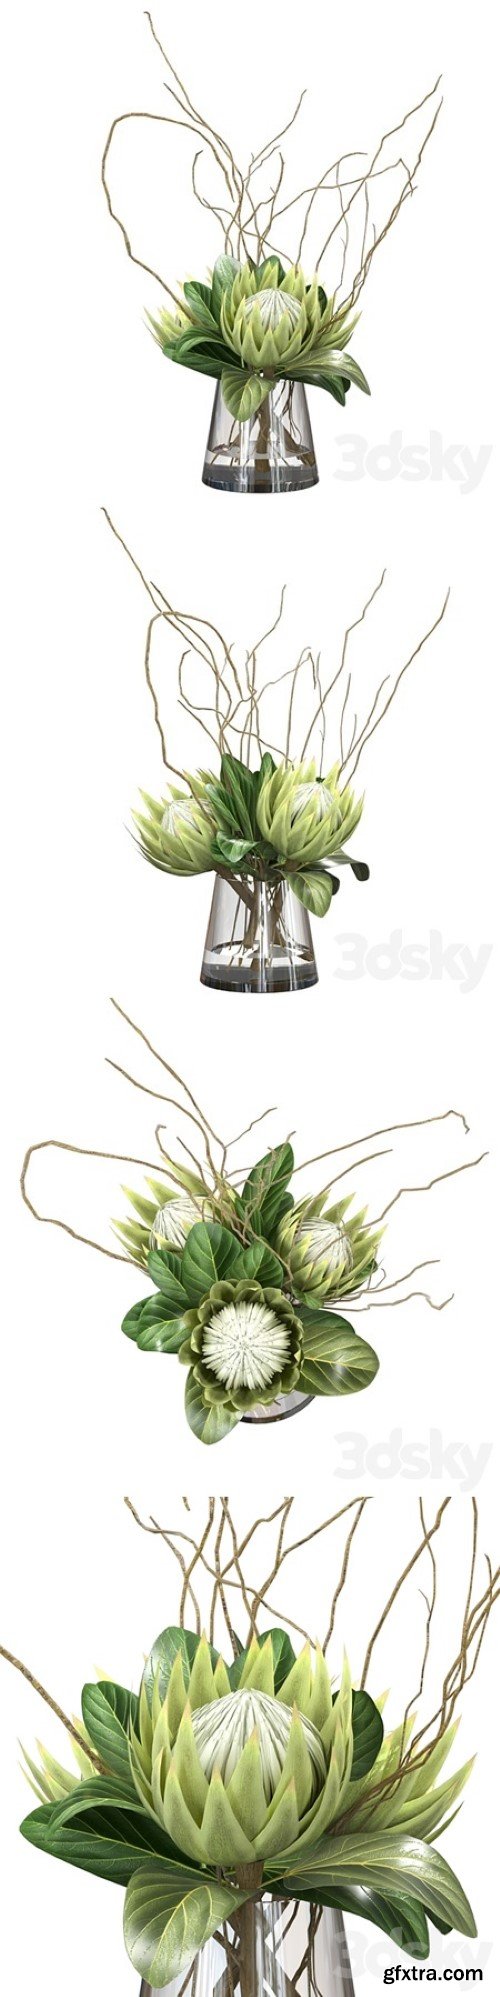 Pro 3DSky - Green bouquet with protea